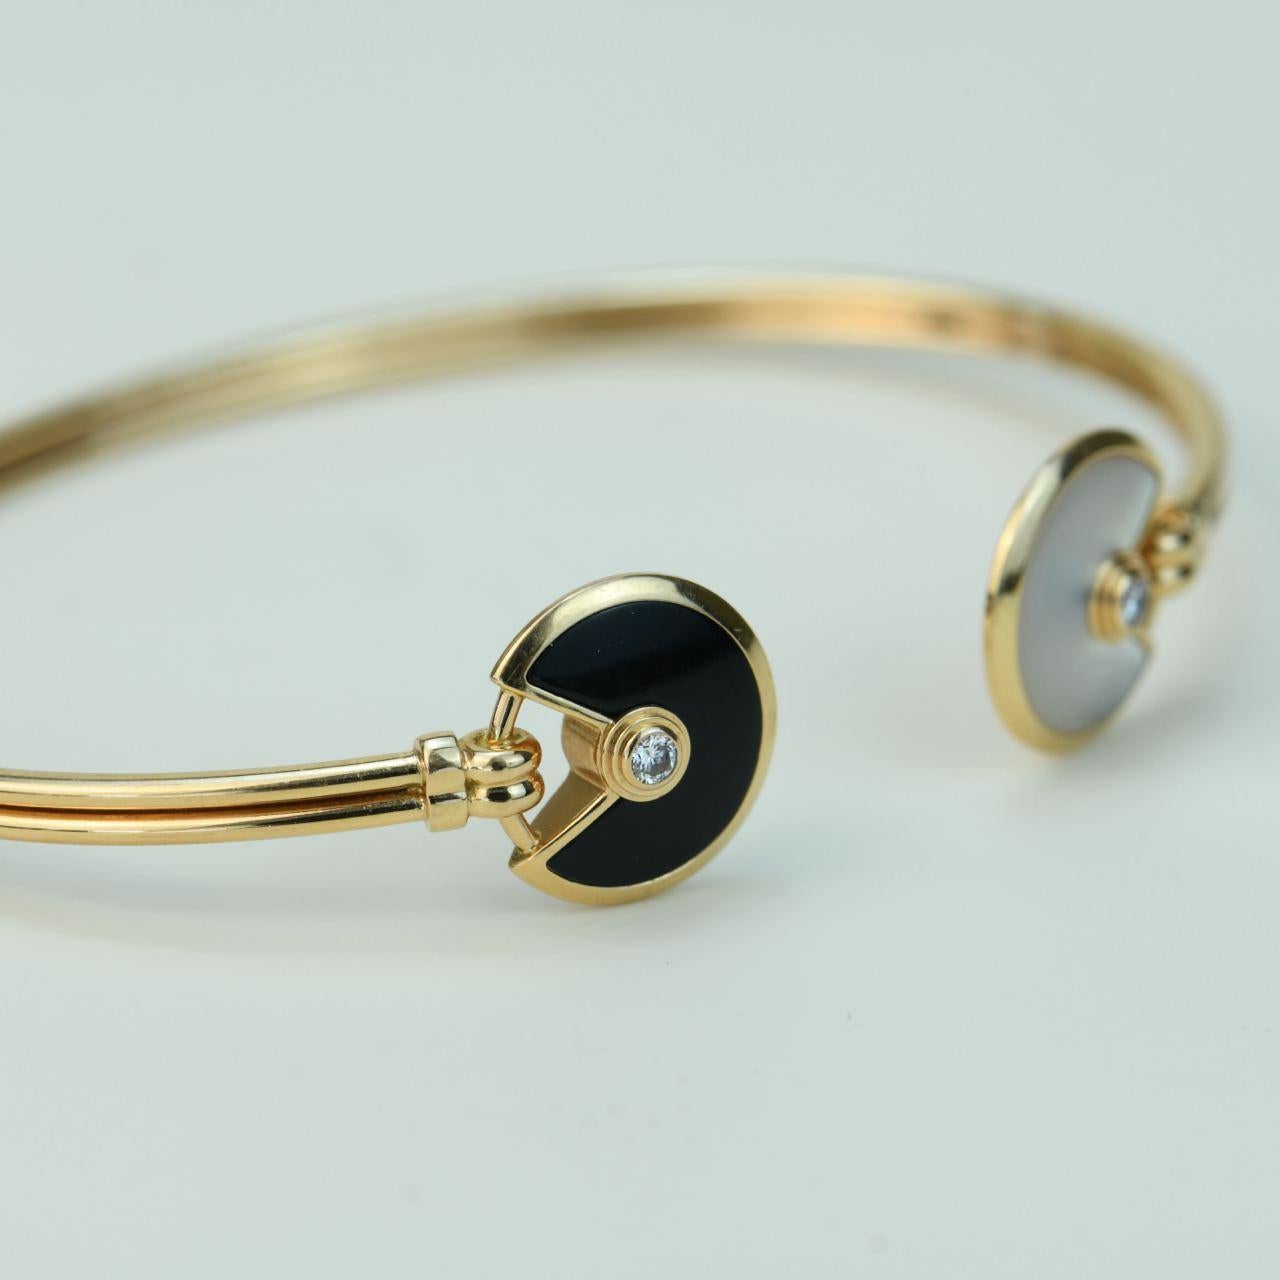 Brilliant Cut Cartier Amulette Diamond Mother of Pearl and Onyx 18K Yellow Gold Bracelet Size  For Sale